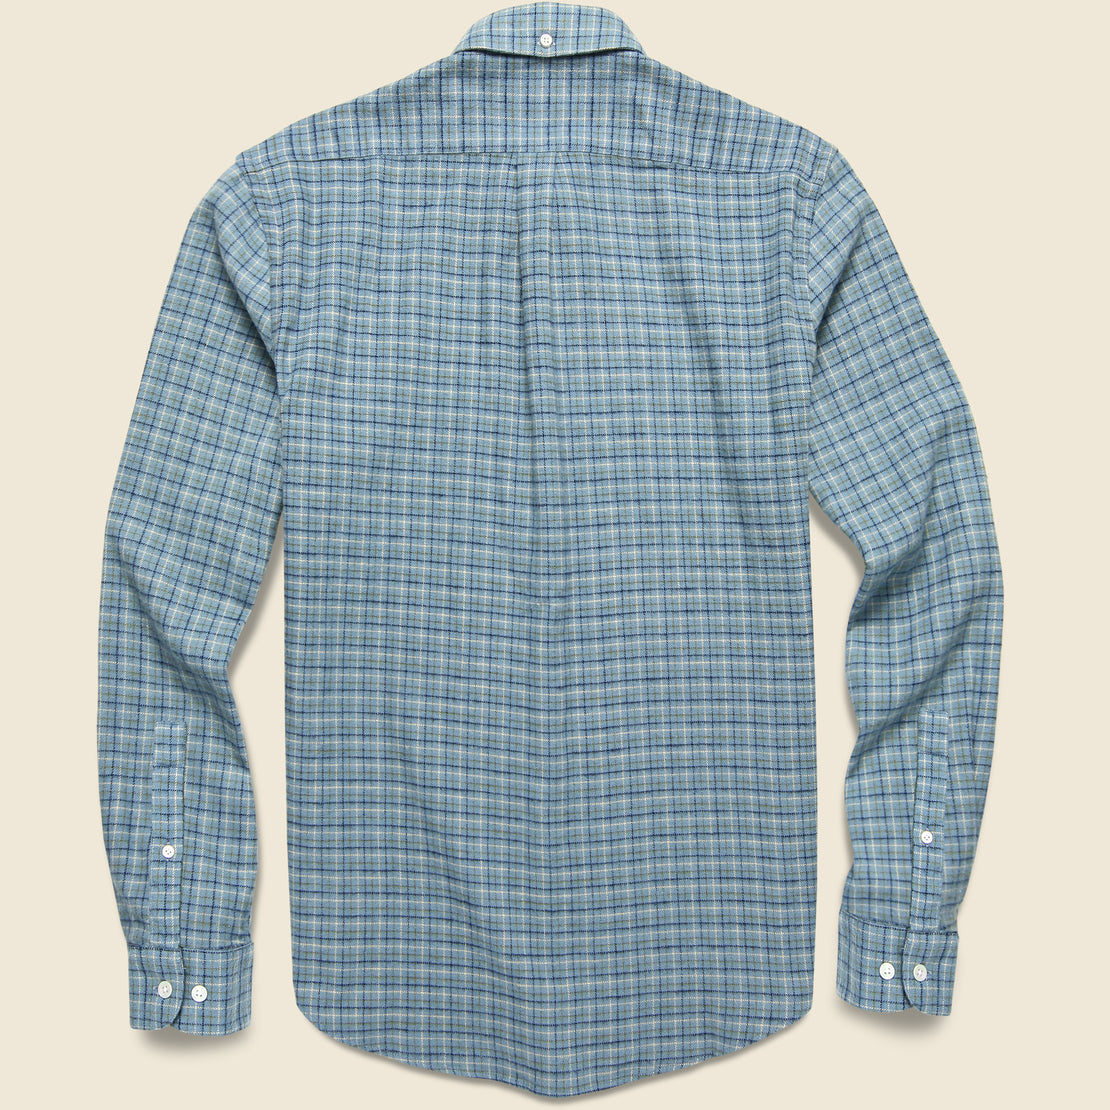 Balcony Shirt - Blue - Portuguese Flannel - STAG Provisions - Tops - L/S Woven - Plaid